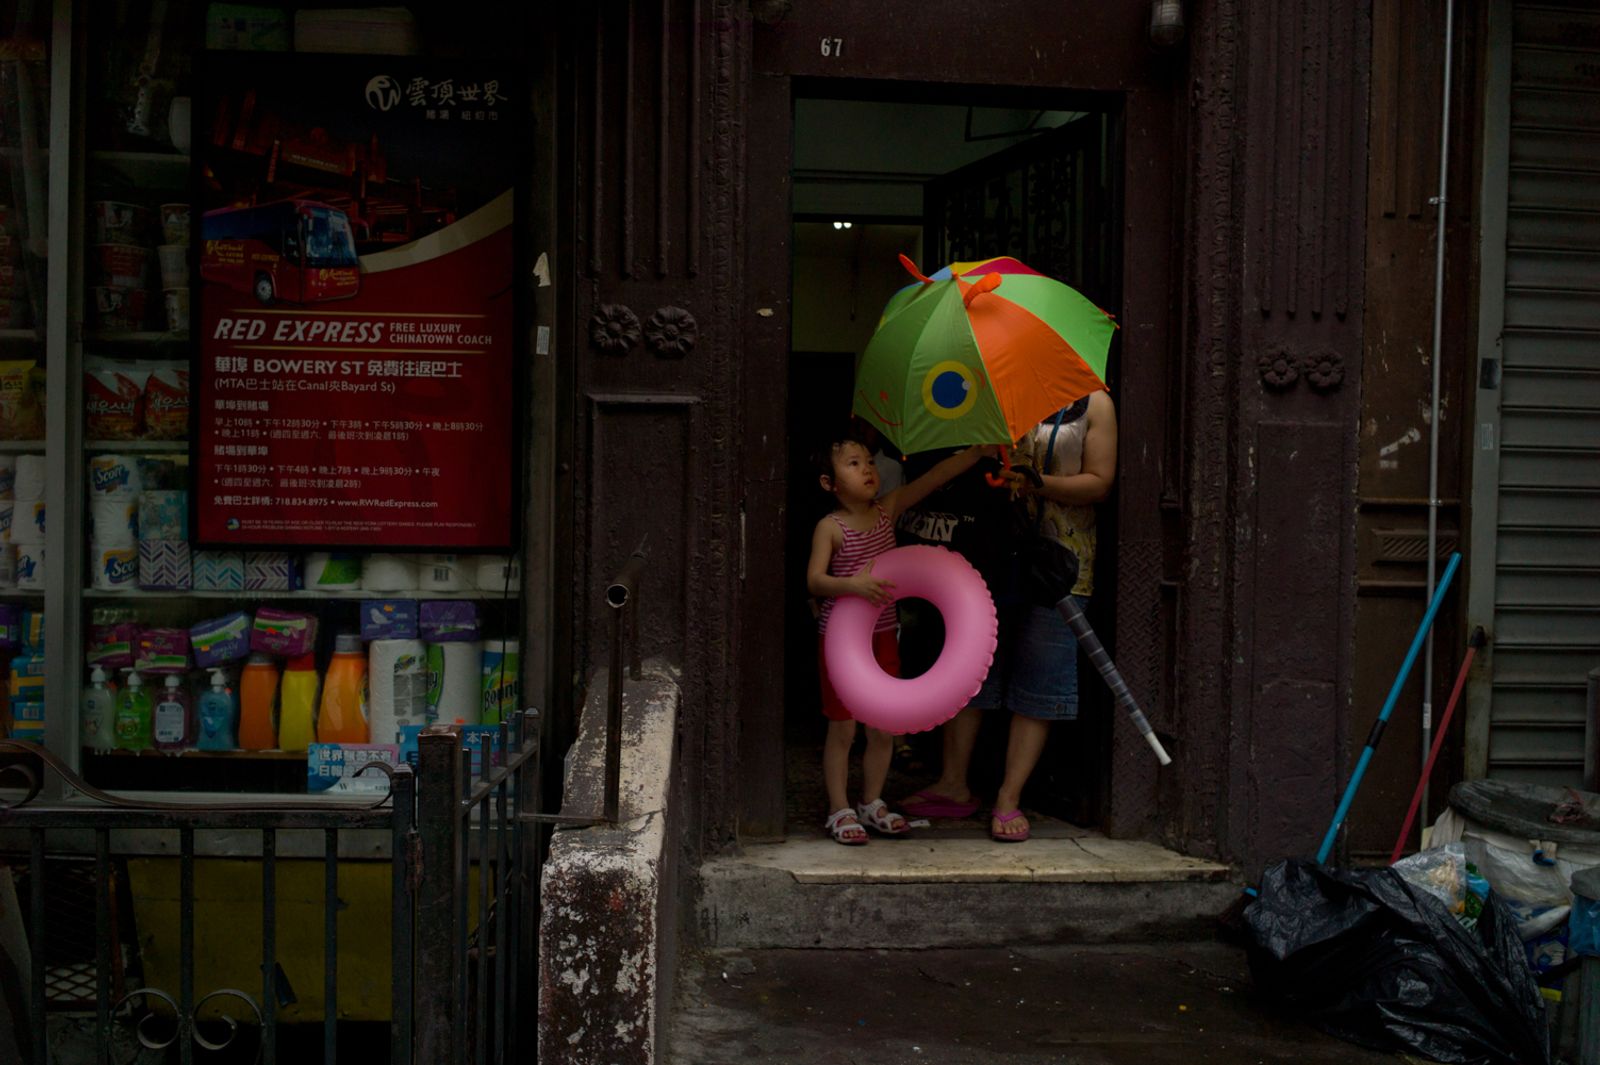 © Dimitri Mellos - Image from the Chinatown photography project